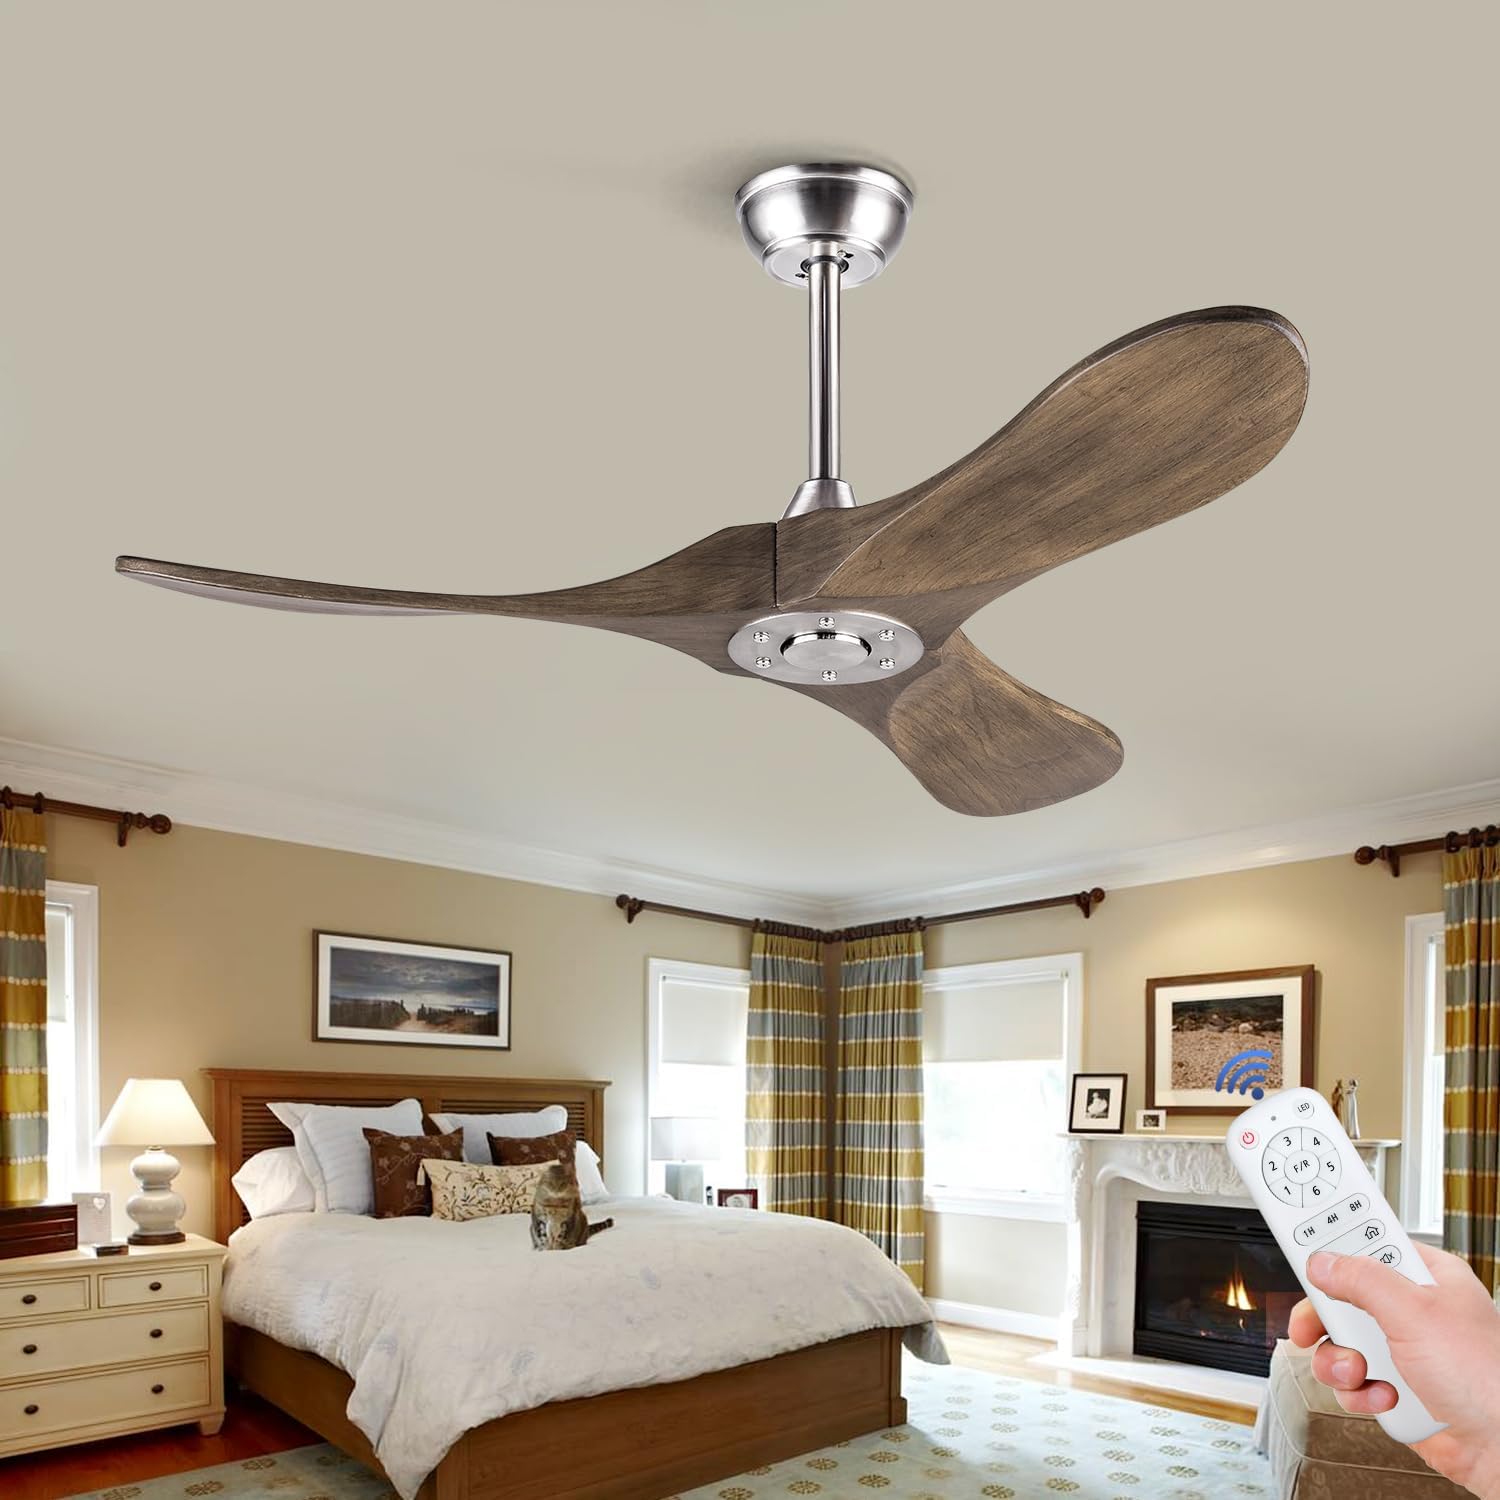 BOJUE 42 Wood Ceiling Fan Without Light and Remote Control, Low Profile Ceiling Fans no Lights Indoor Outdoor for Patio Living Room, Bedroom, Office (Aged Pewter-light Grey Weathered Oak Blades)